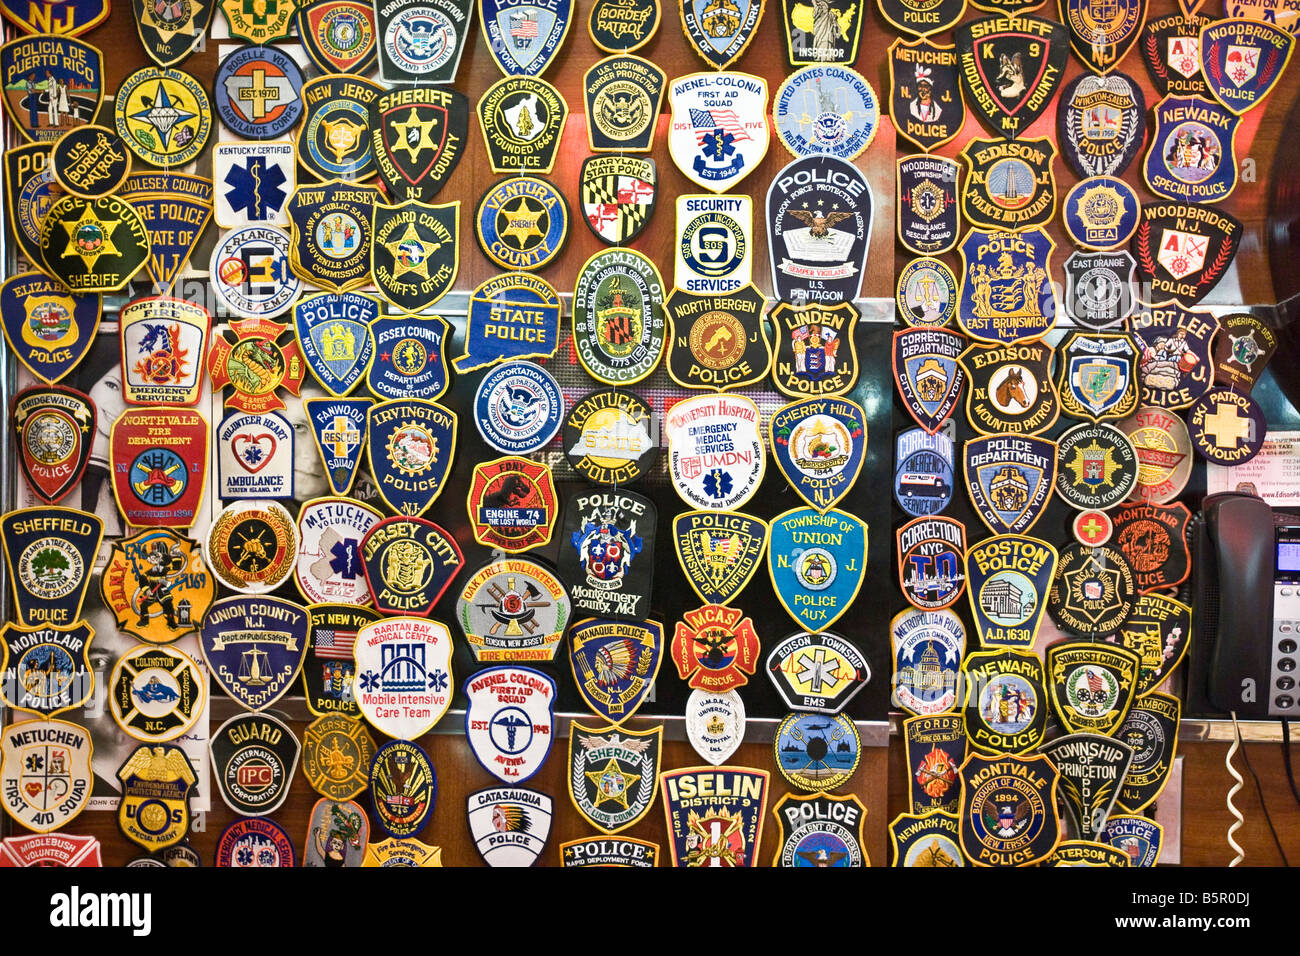 Police and emergency services badges on a wall Stock Photo